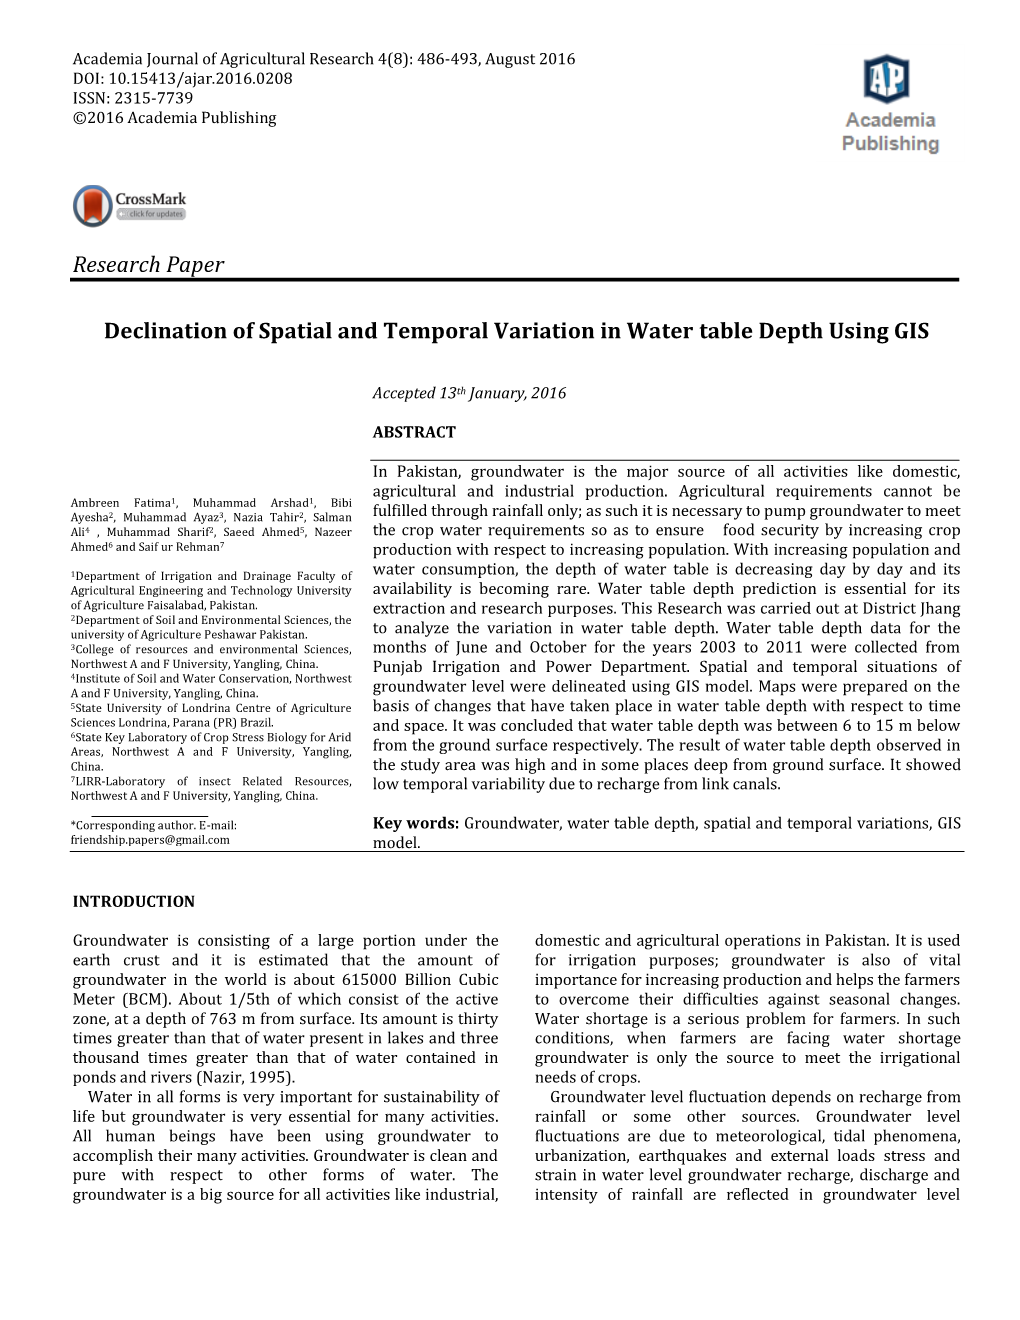 Research Paper Declination of Spatial and Temporal Variation in Water